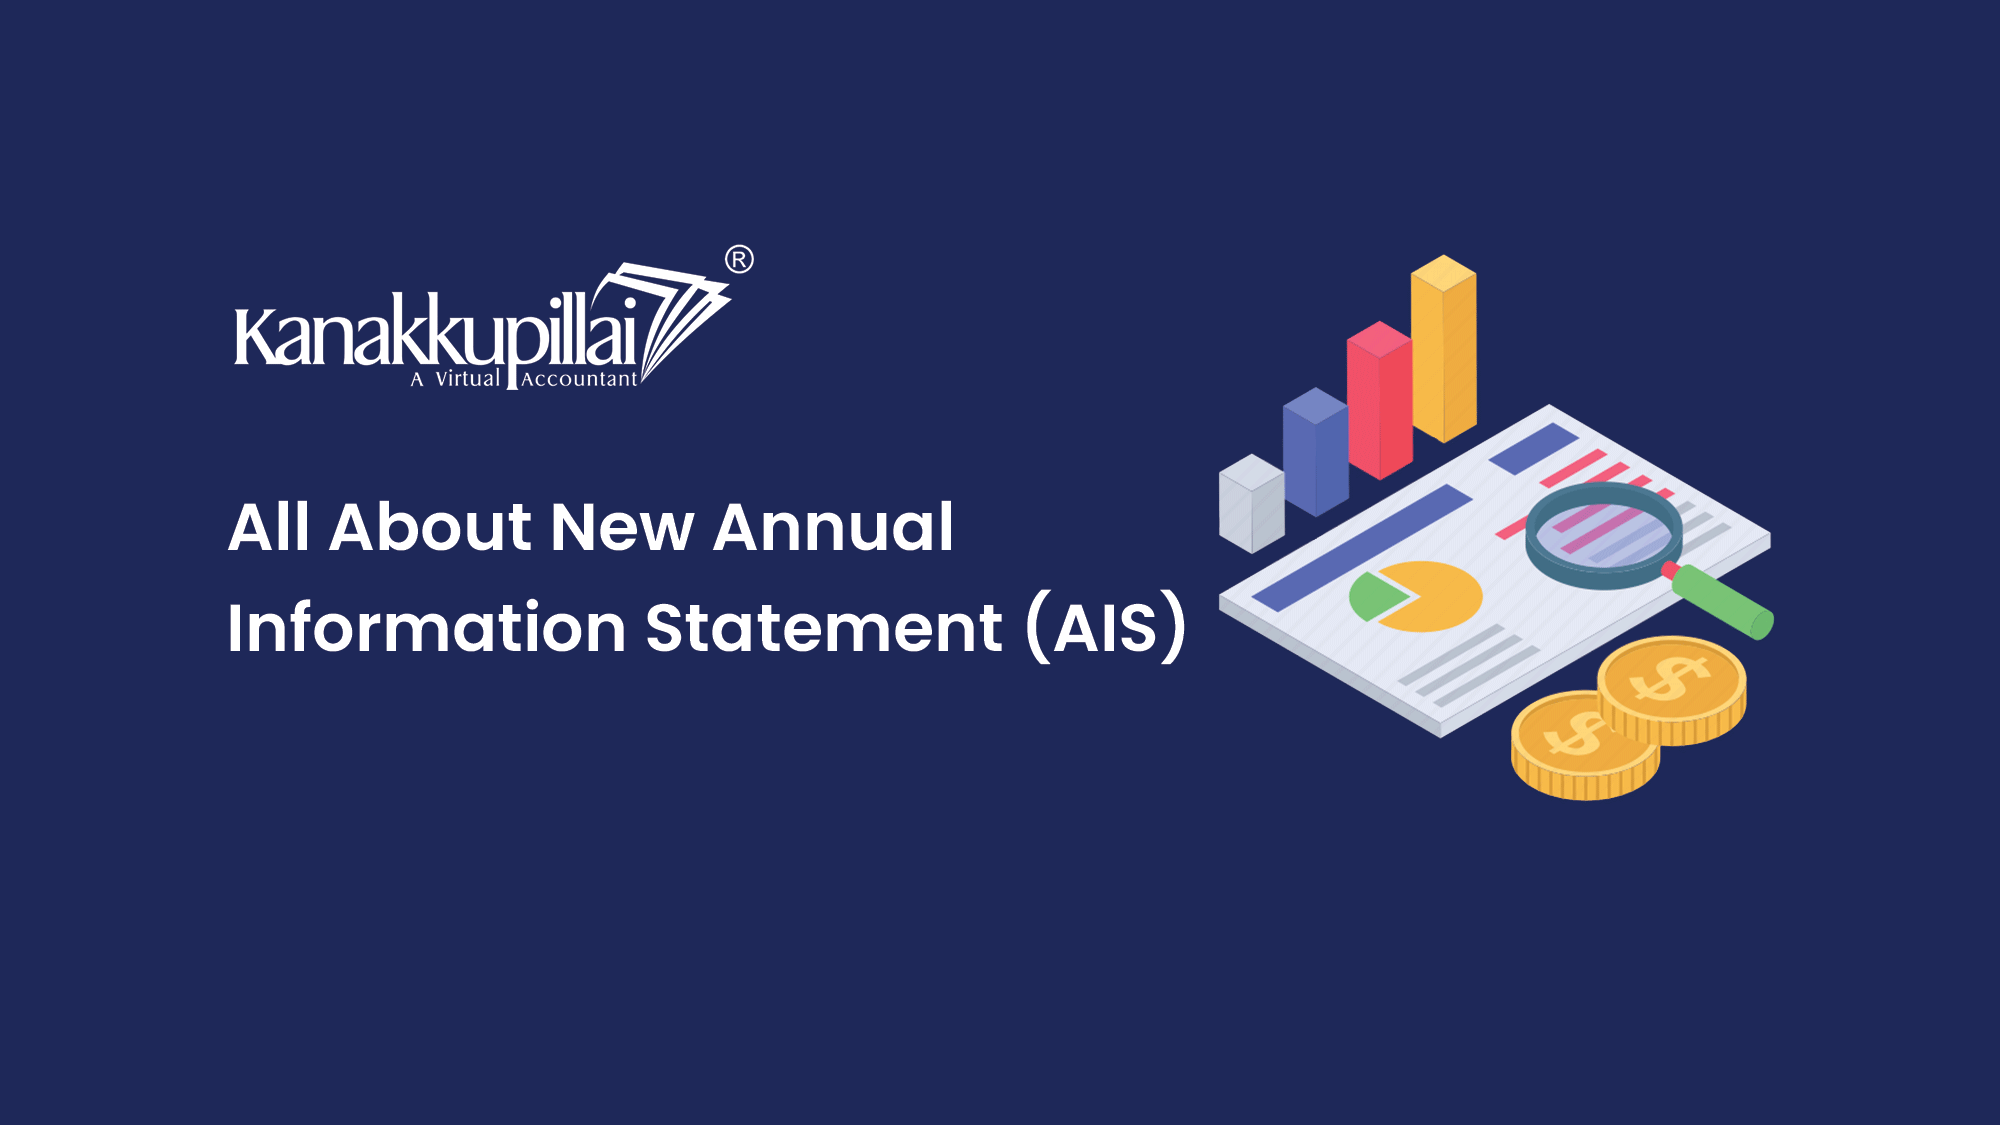 All About New Annual Information Statement (AIS)